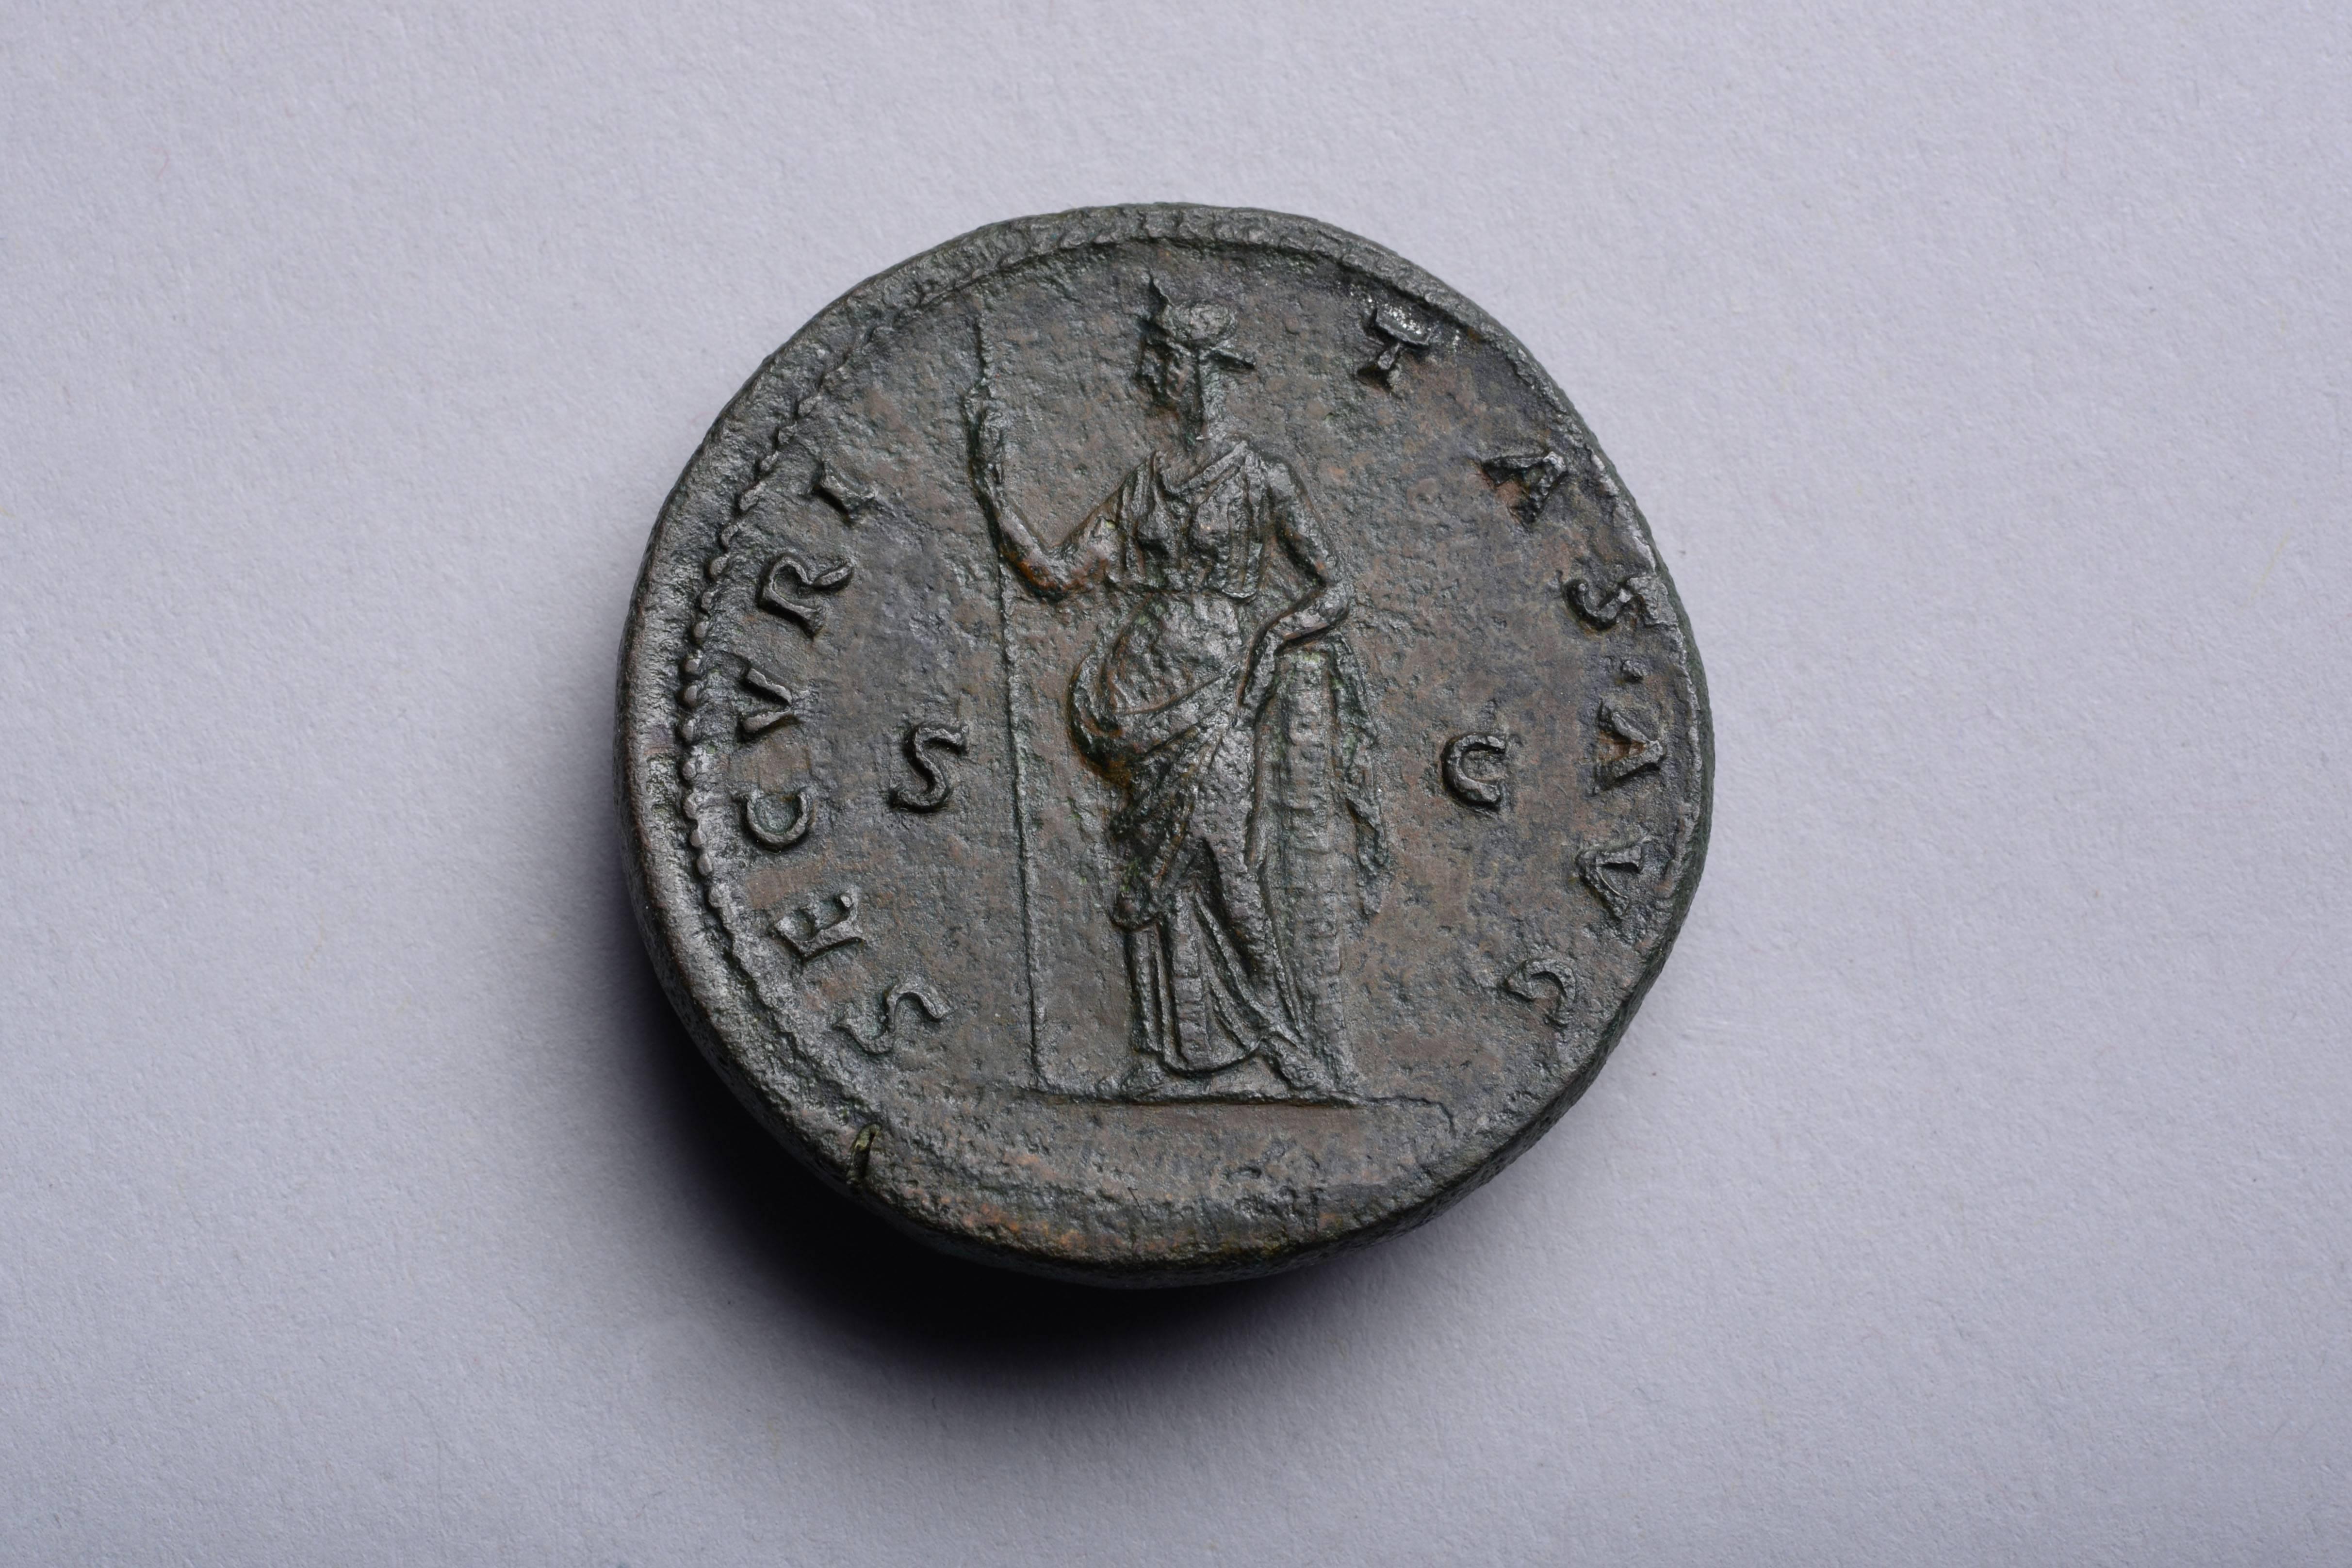 A medallic ancient Roman sestertius with an outstanding pedigree, once in the famous collection of Clarence Sweet Bement (1843-1923) and the mysterious collector known by the pseudonym, Richard J. Graham.

Issued under Emperor Antoninus